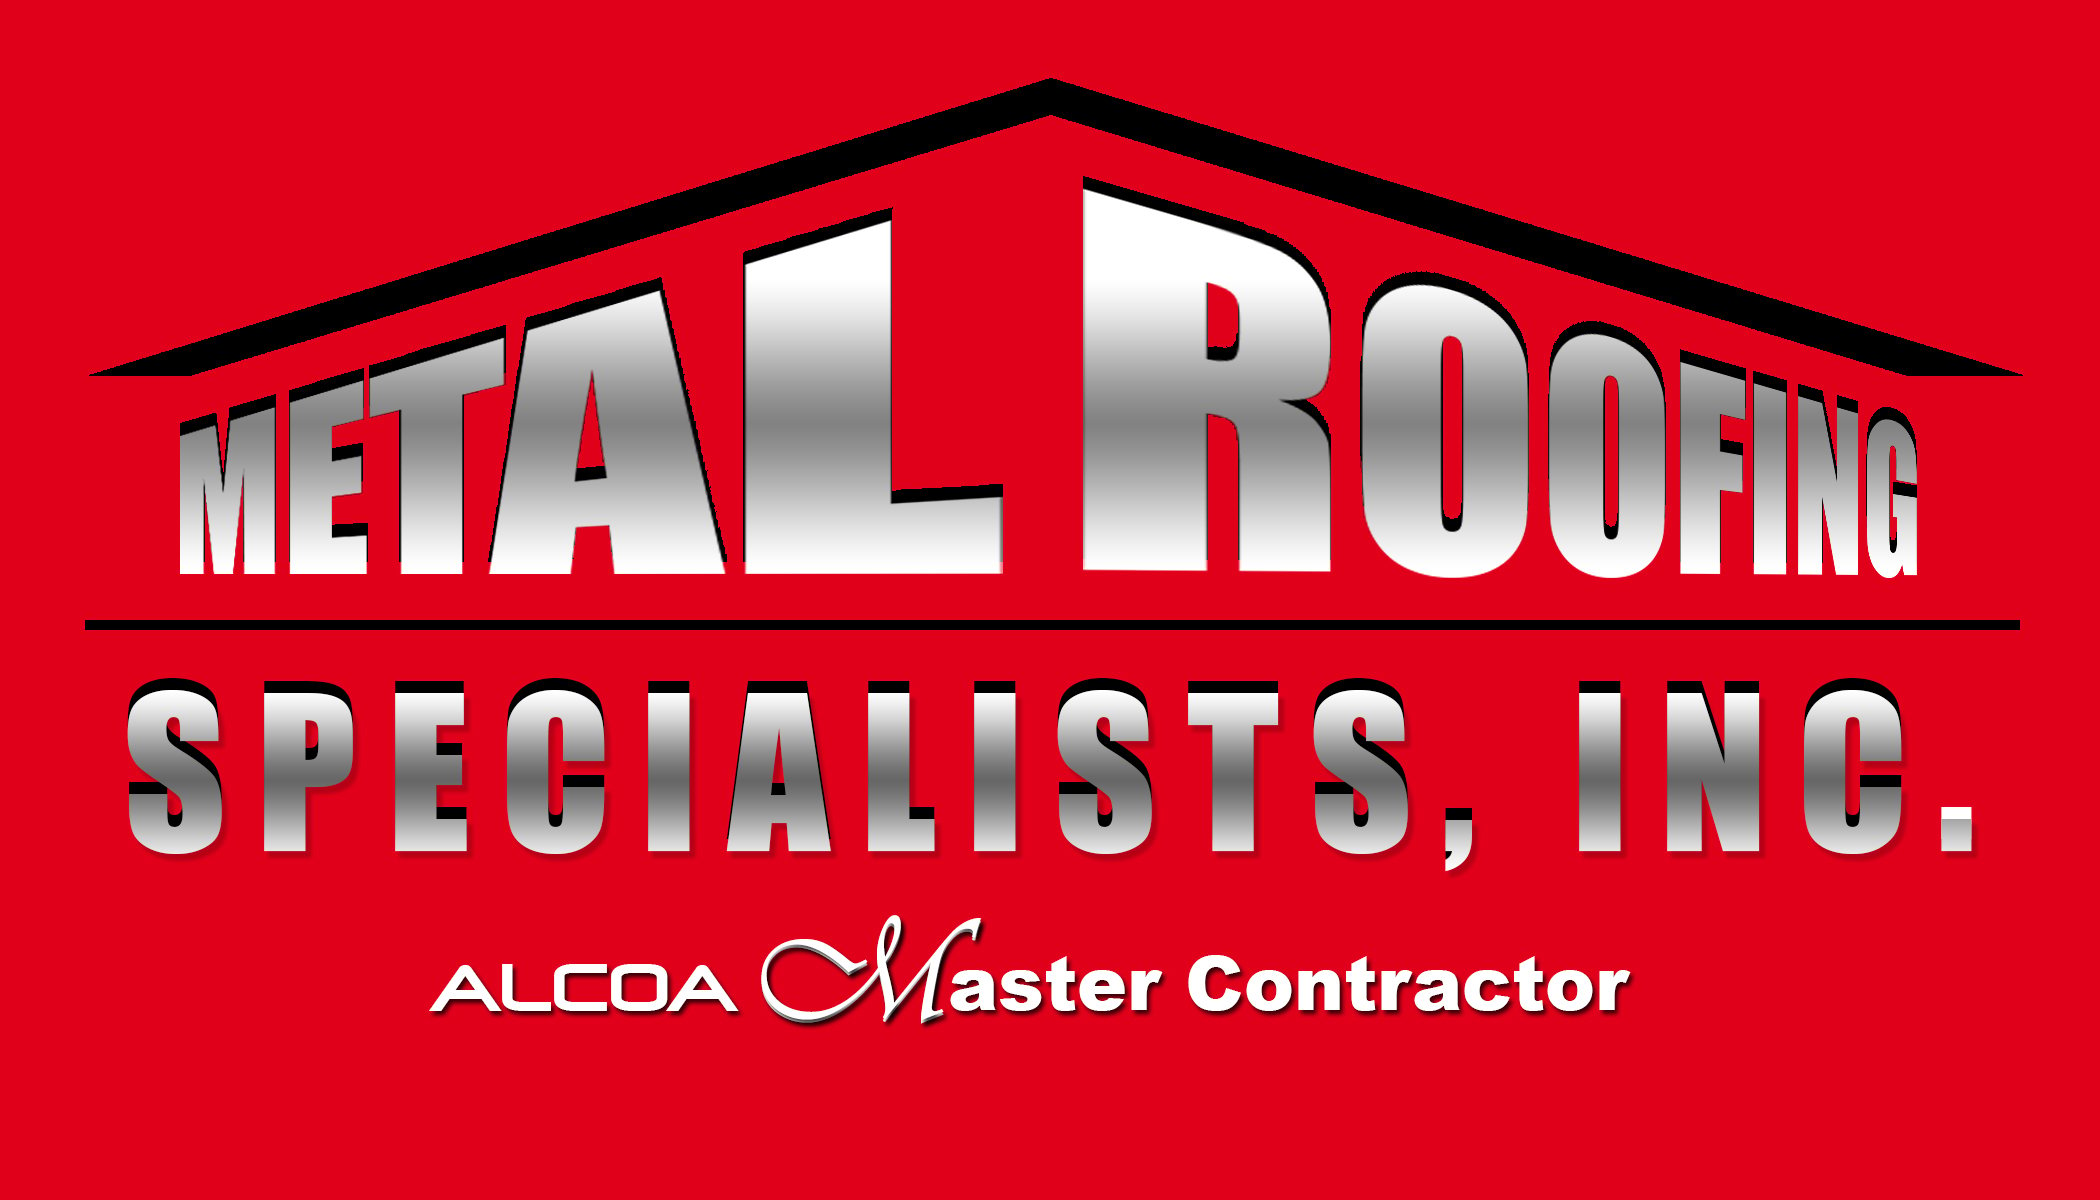 Metal Roofing Specialists, Inc. Logo